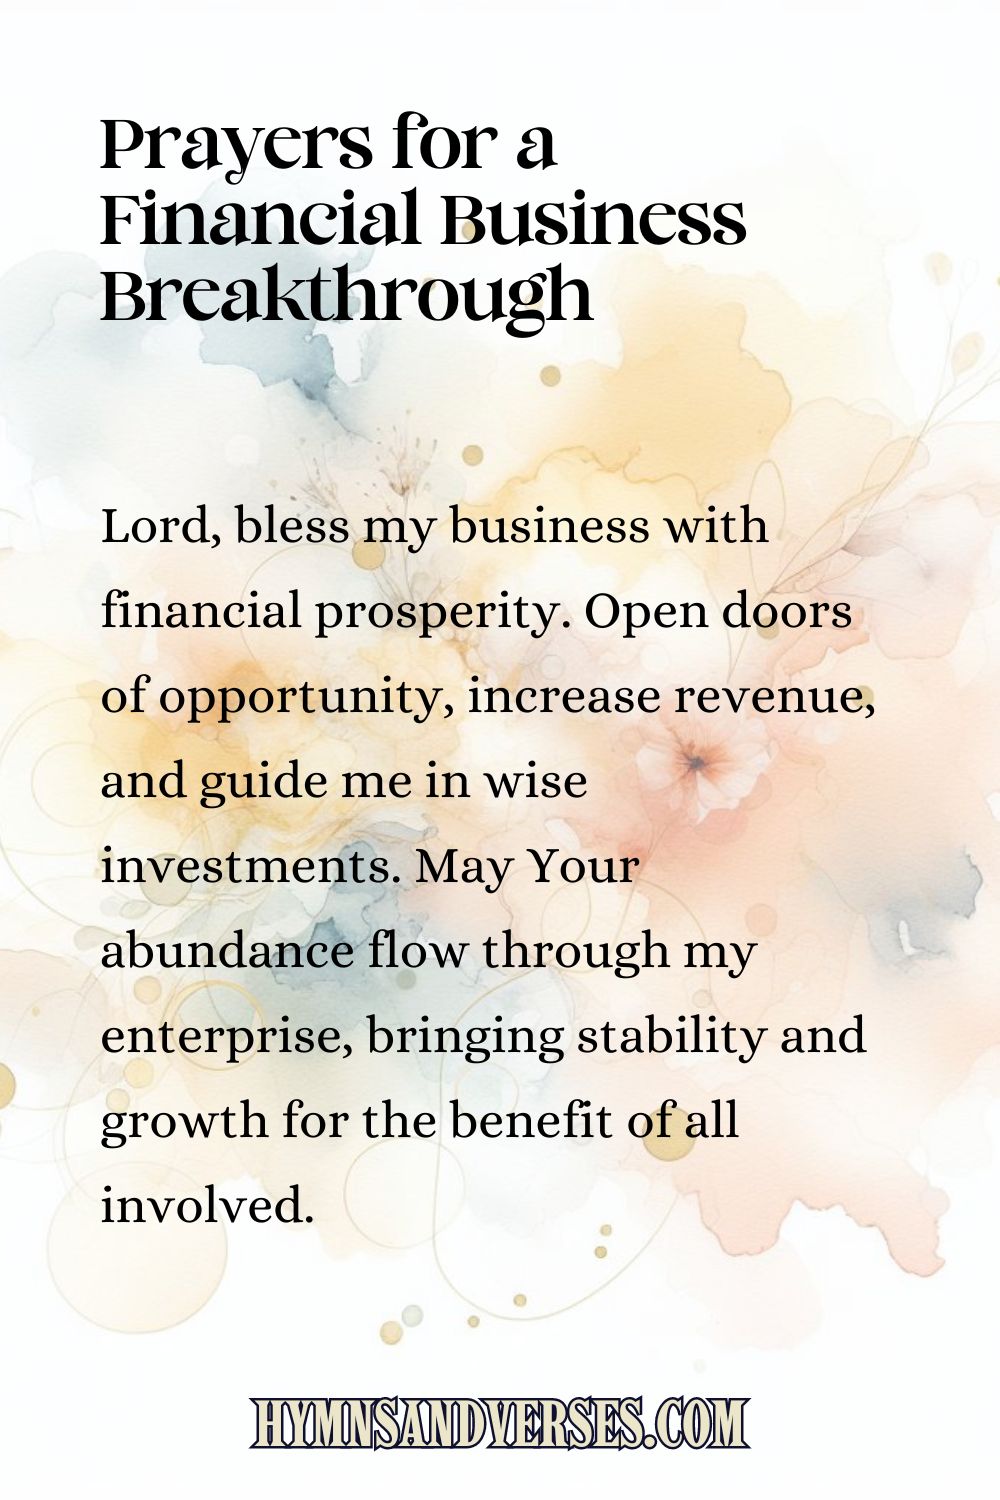 Pin sized image for Prayers for a Financial Business Breakthrough, reads: Lord, bless my business with financial prosperity. Open doors of opportunity, increase revenue, and guide me in wise investments. May Your abundance flow through my enterprise, bringing stability and growth for the benefit of all involved.